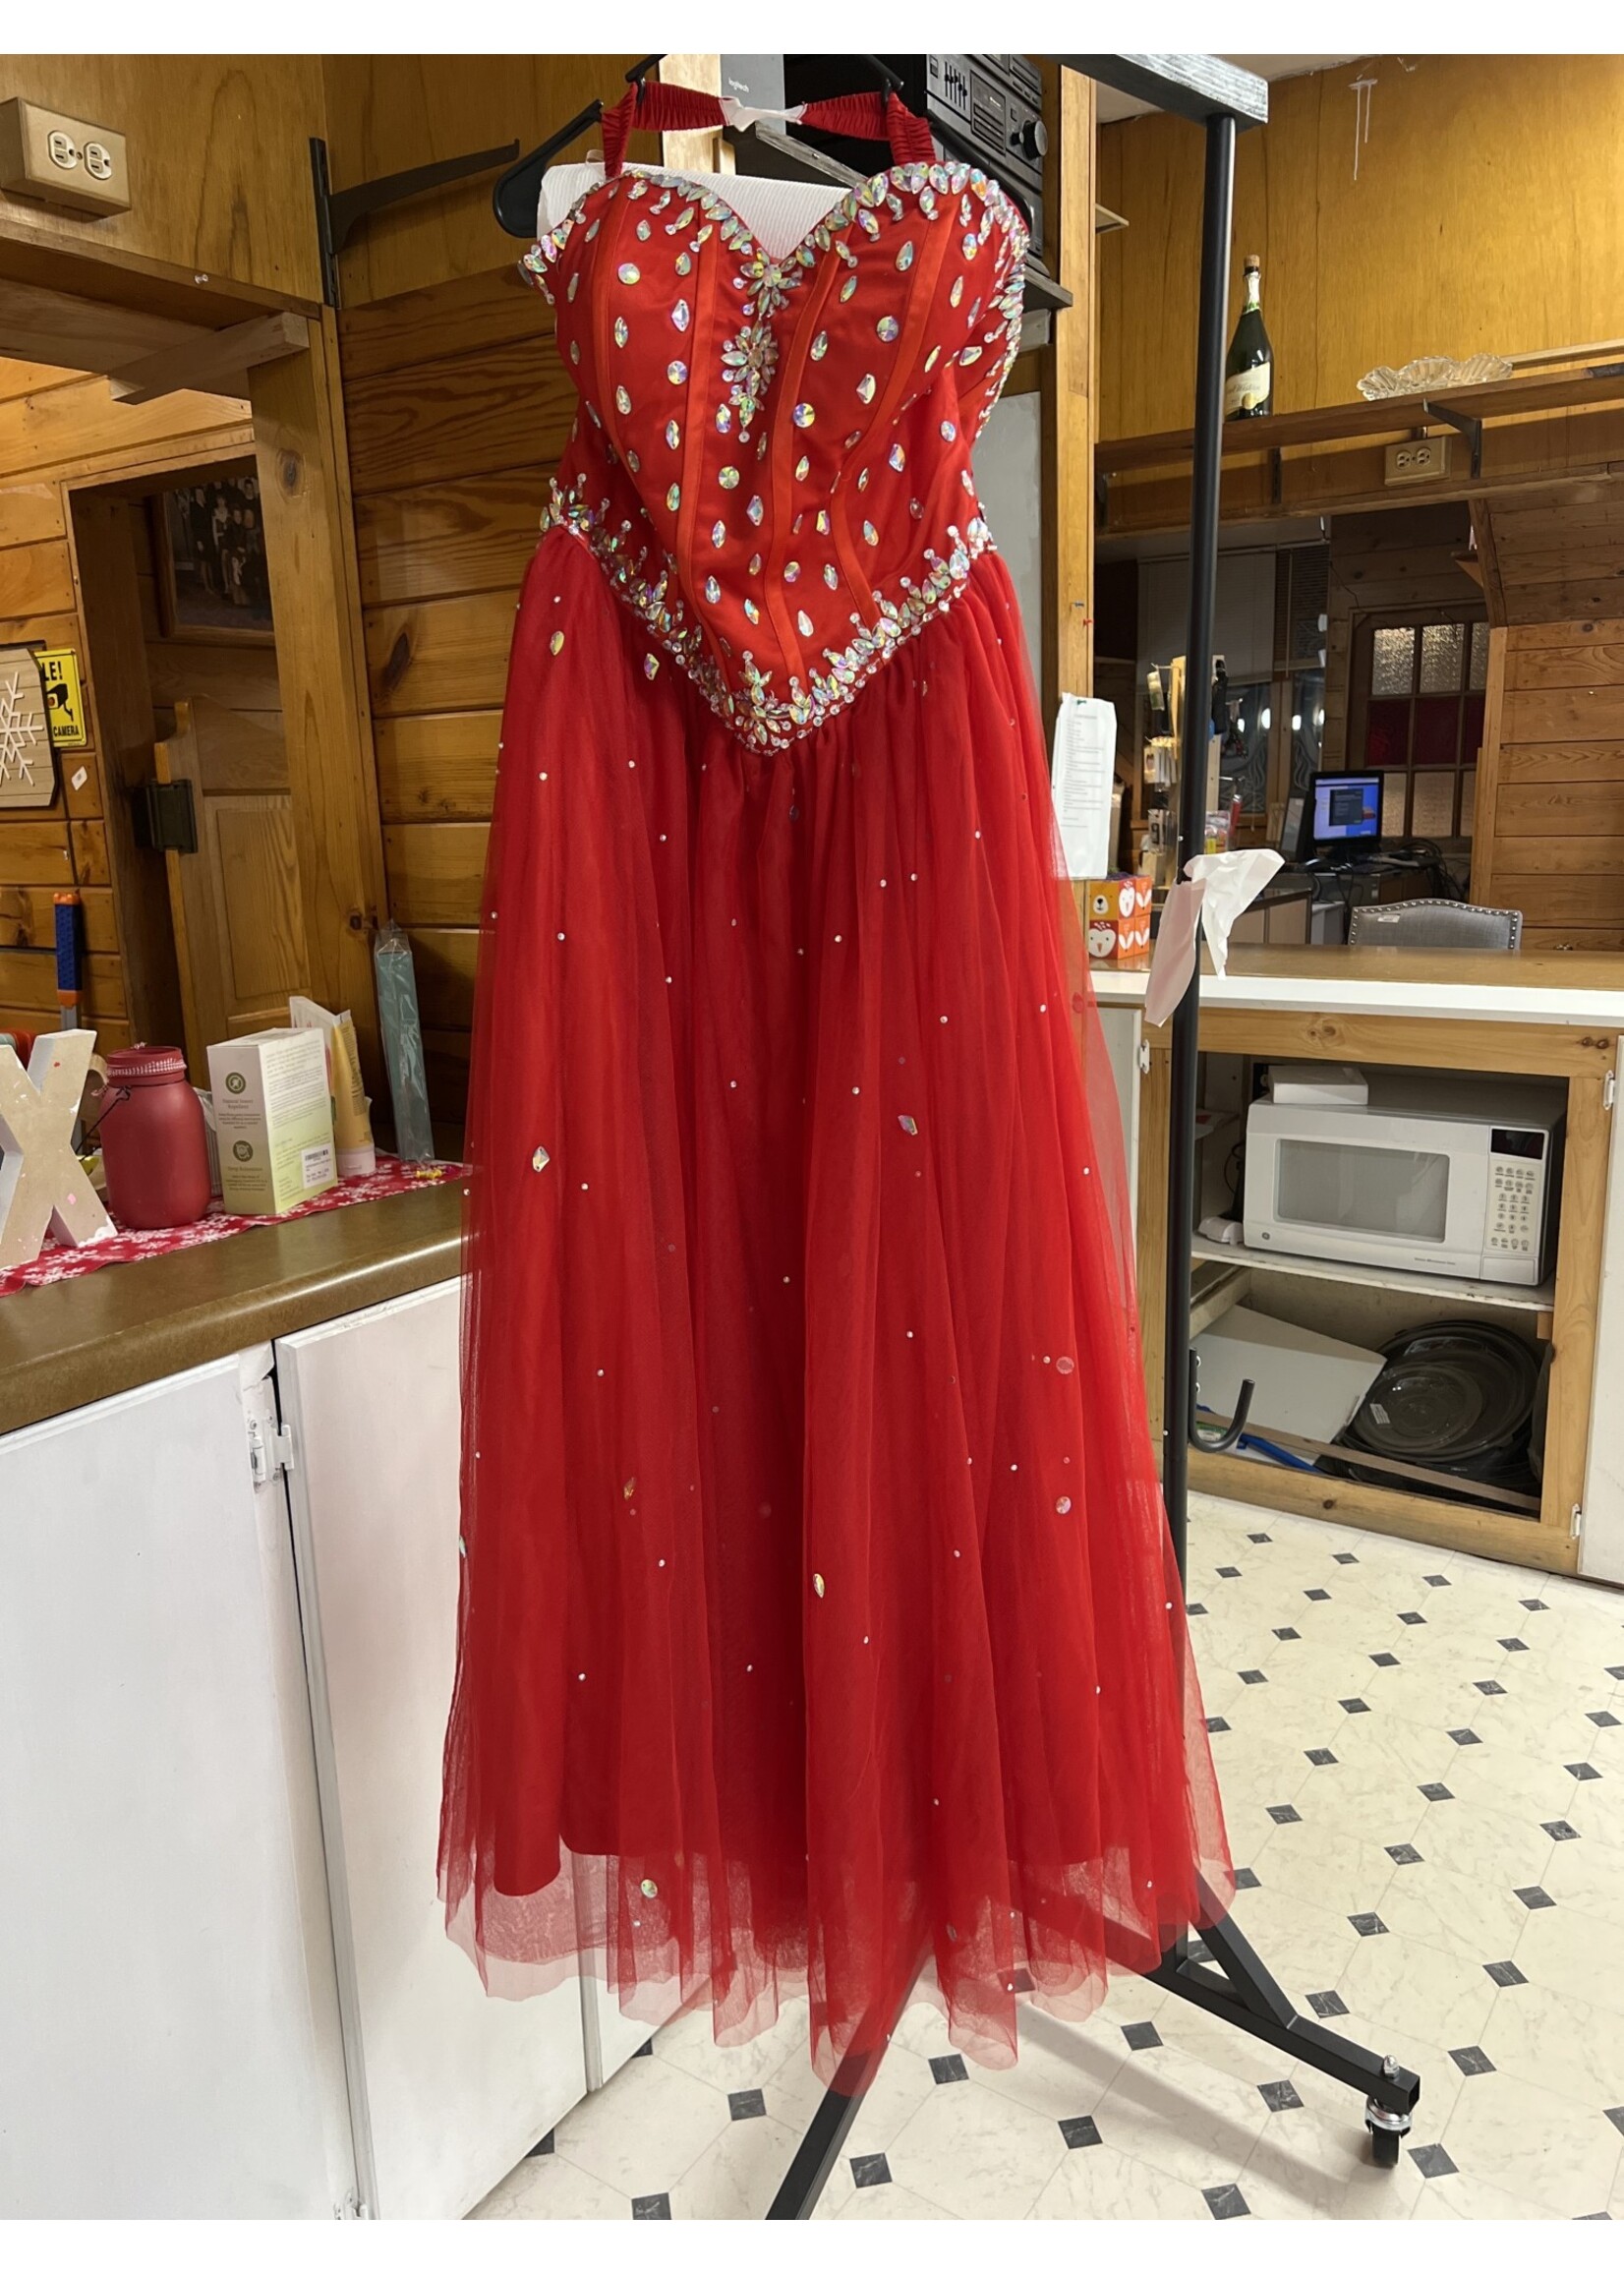 Red Sleeveless Dress with gems- no tags- appears to be size 16